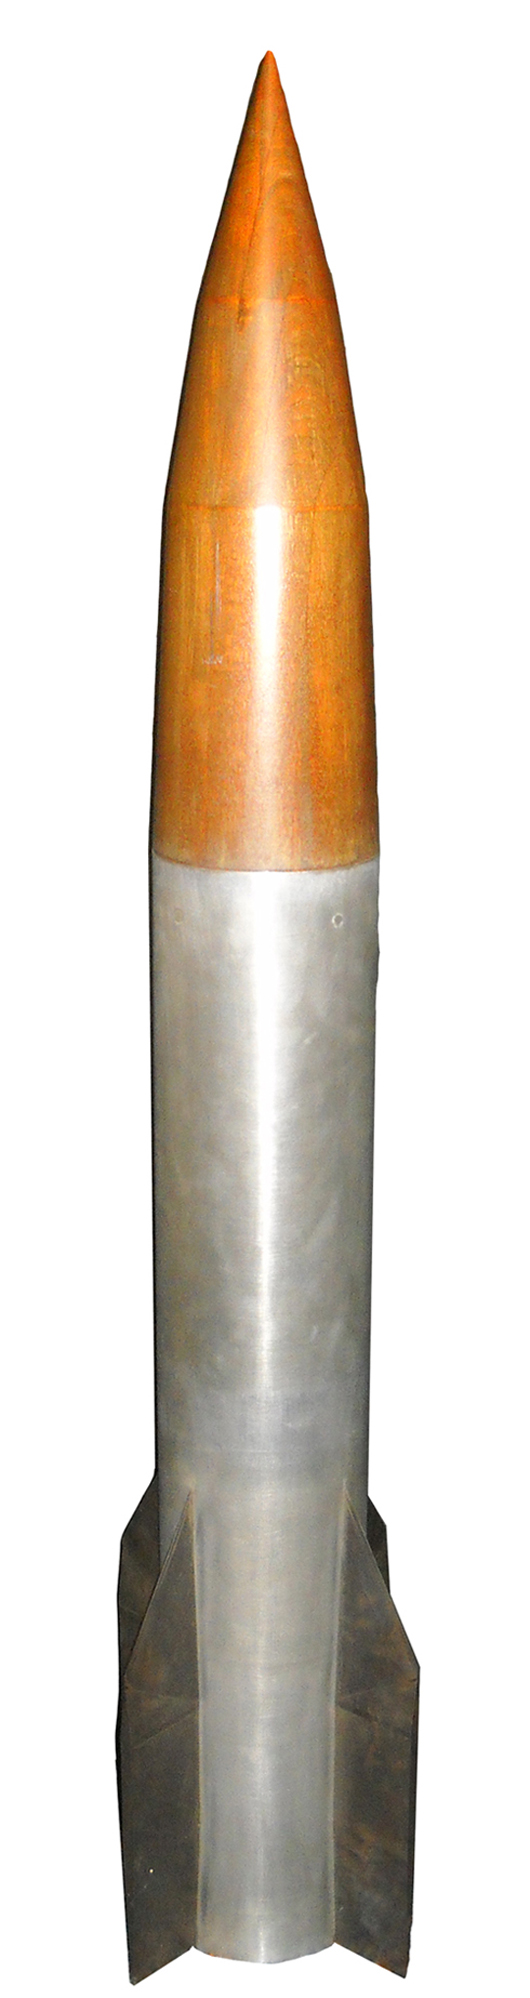 Prototype of German V-2 rocket, 1/3 scale, stamped ‘U of M (University of Michigan) W.R.R.C. (Willow Run Research Center), with serial number. PFC Auctions image.